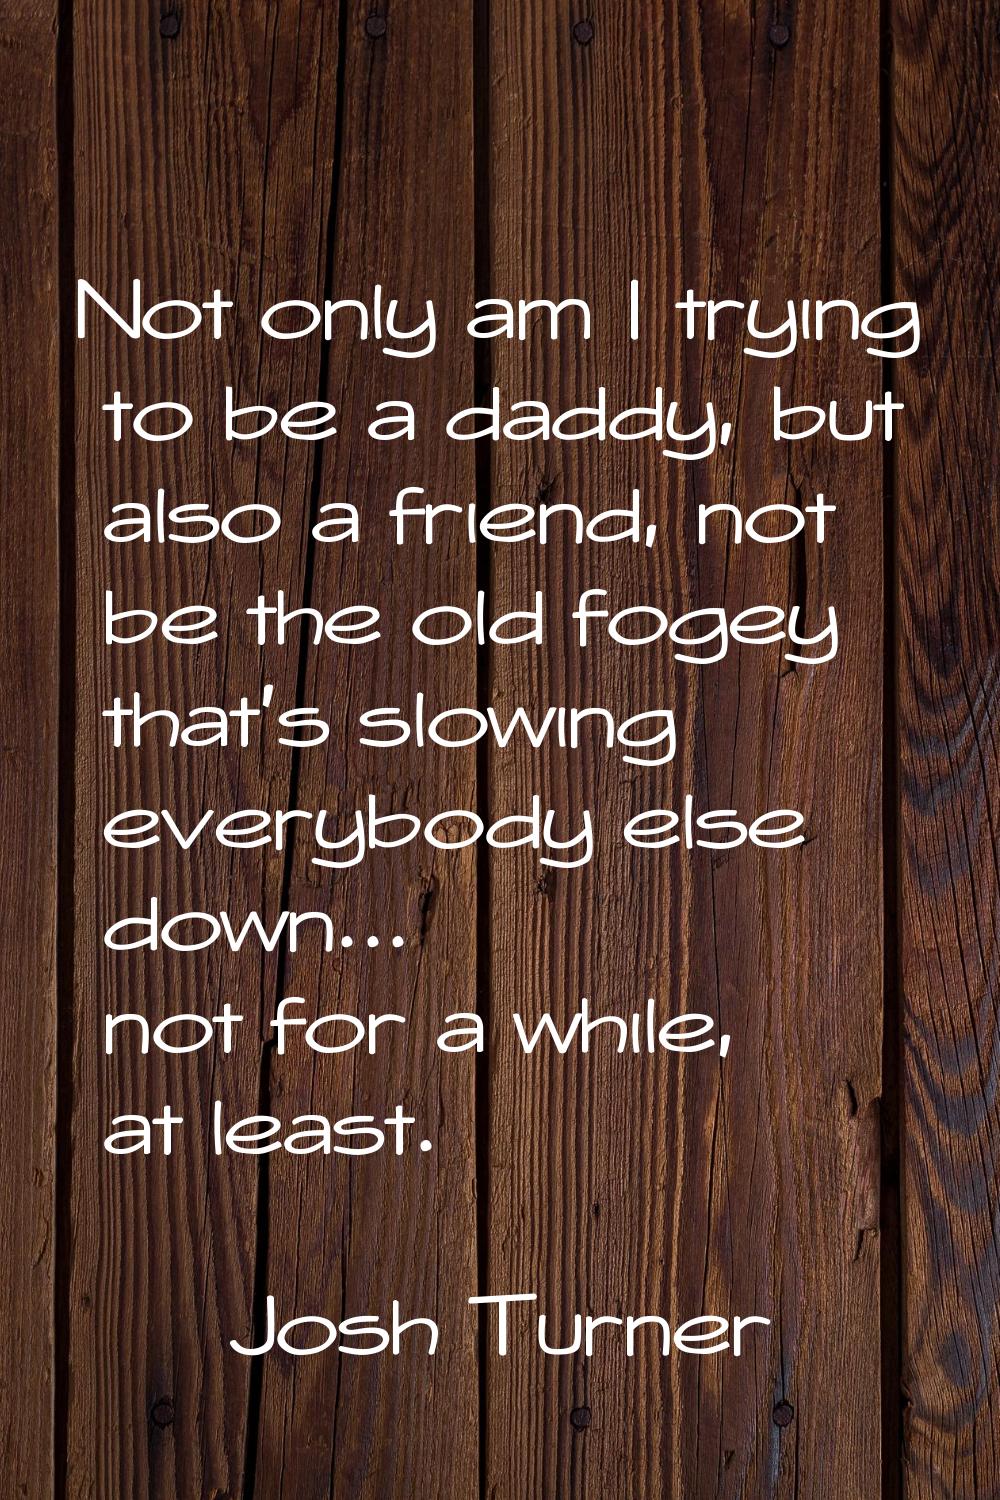 Not only am I trying to be a daddy, but also a friend, not be the old fogey that's slowing everybod